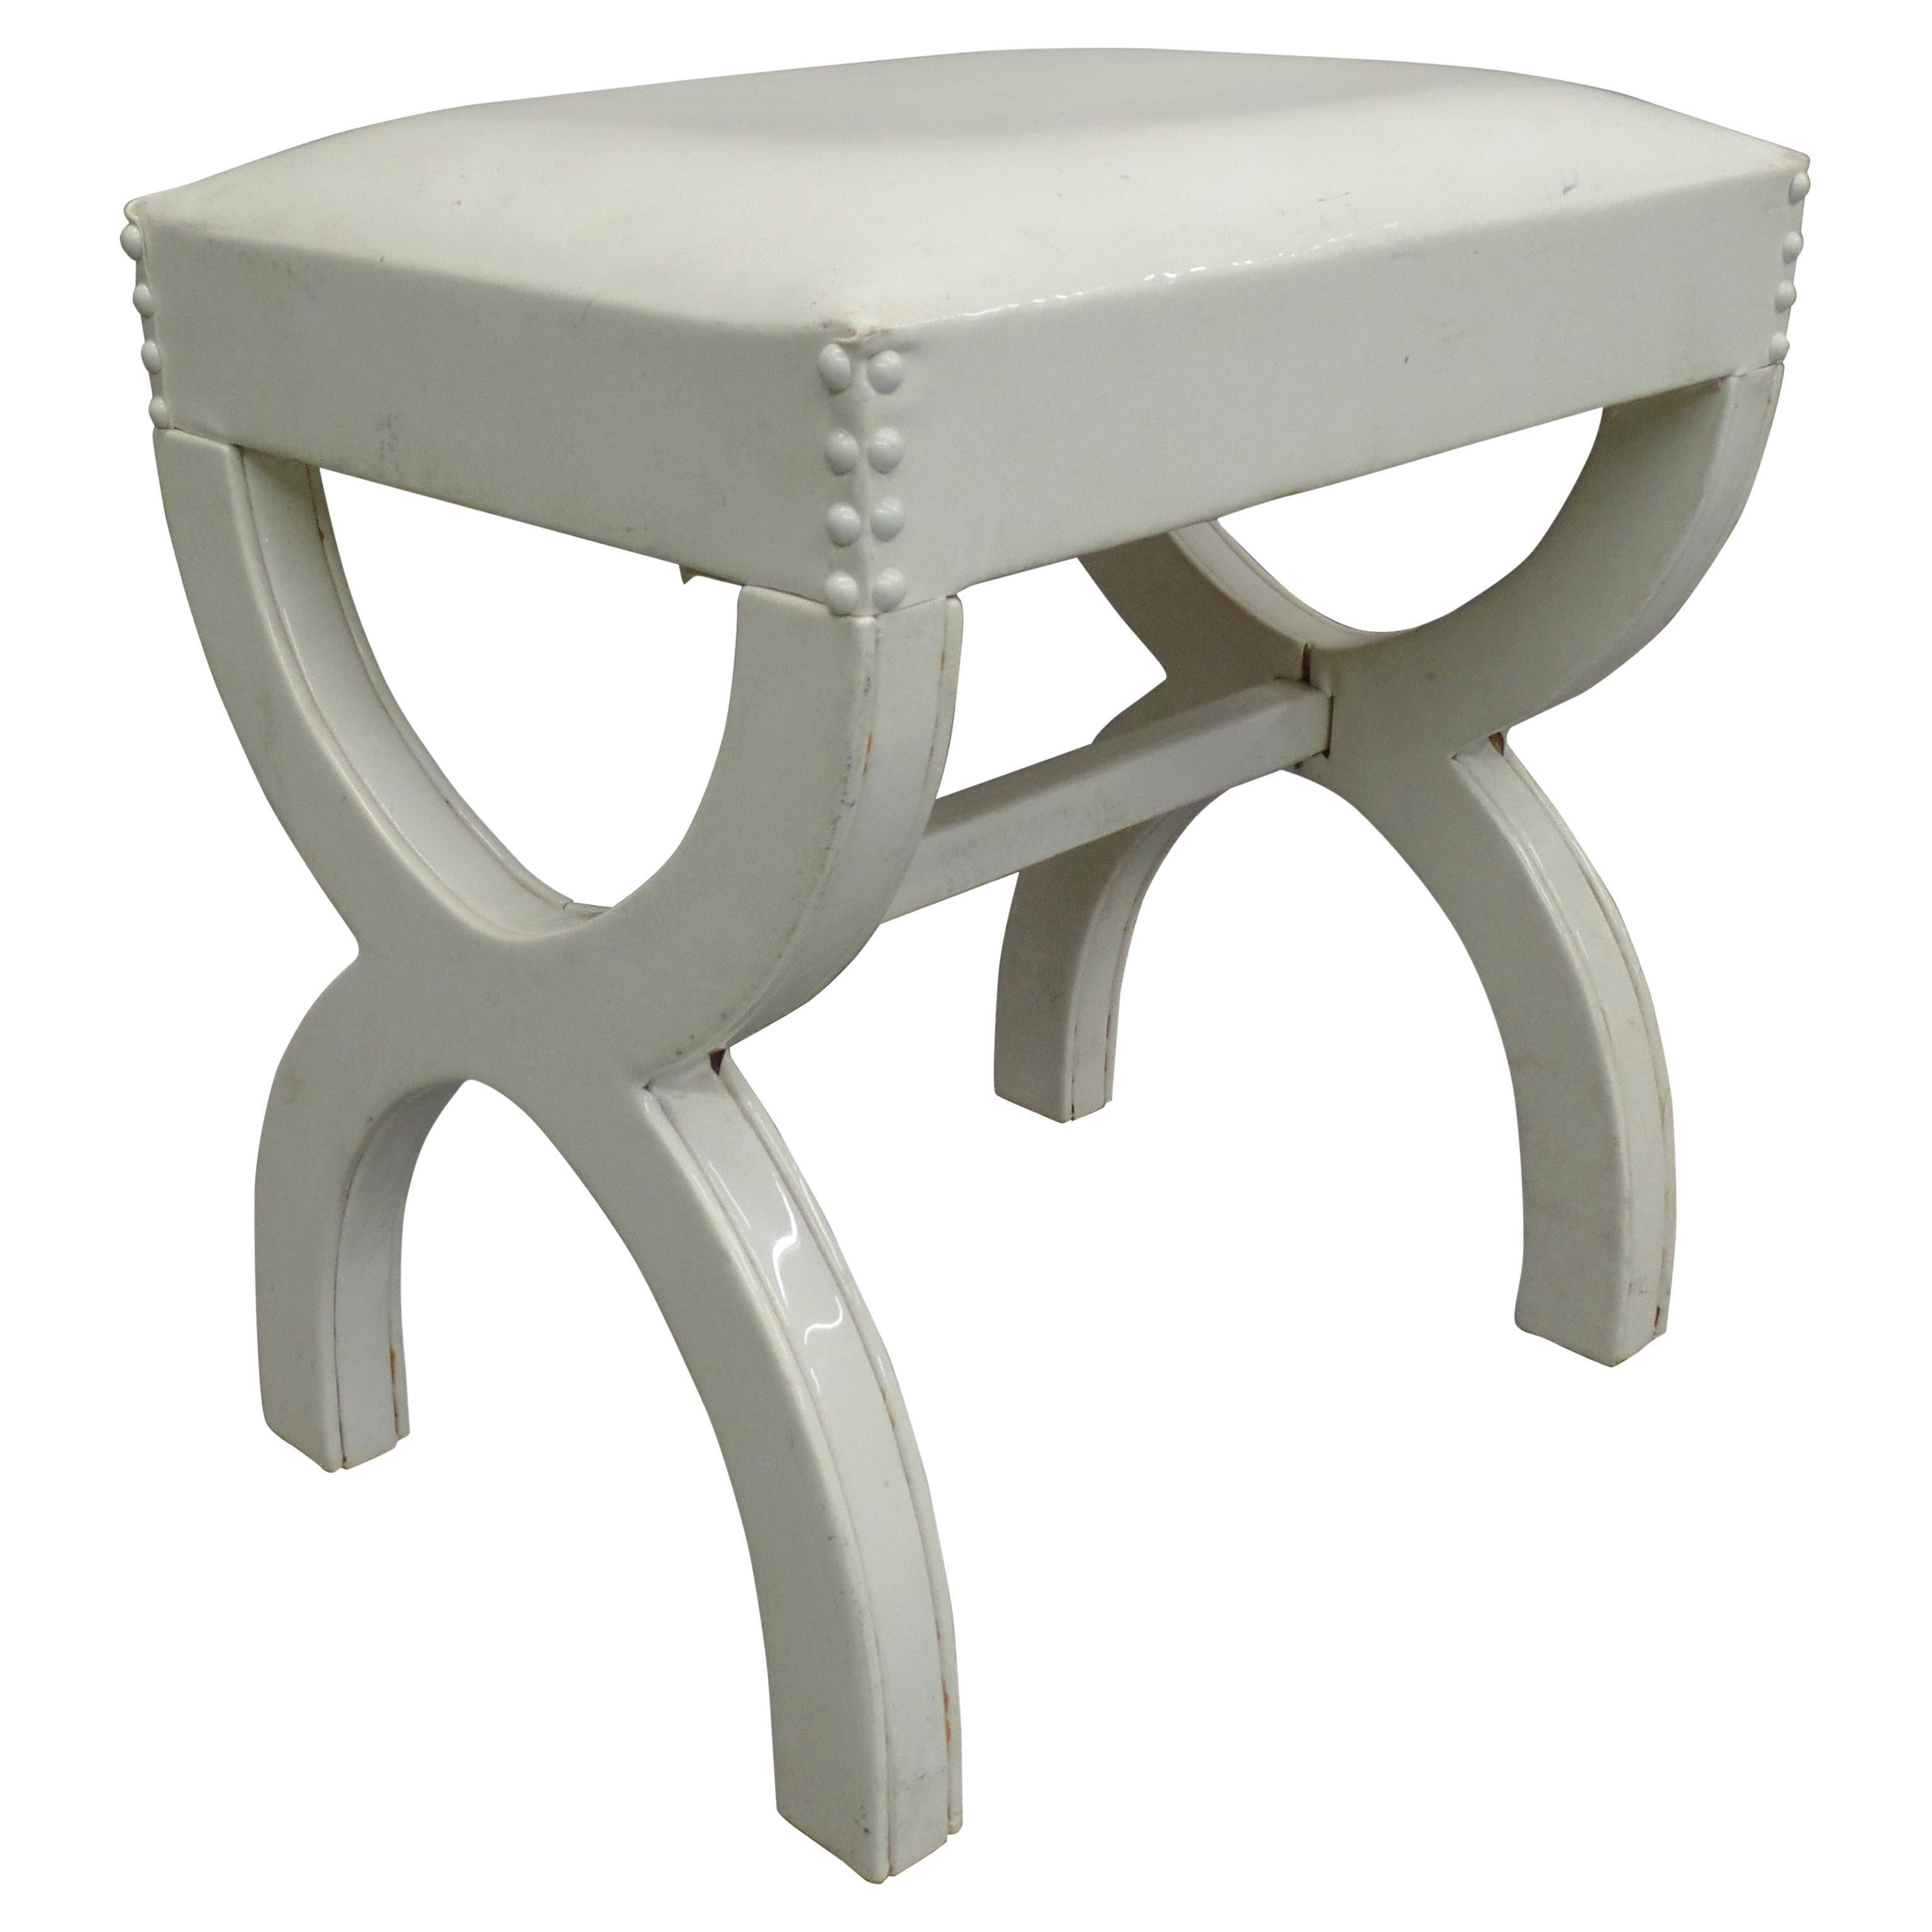 French Modern Neoclassical Bench in White Simi-Leather in style of Andre Arbus